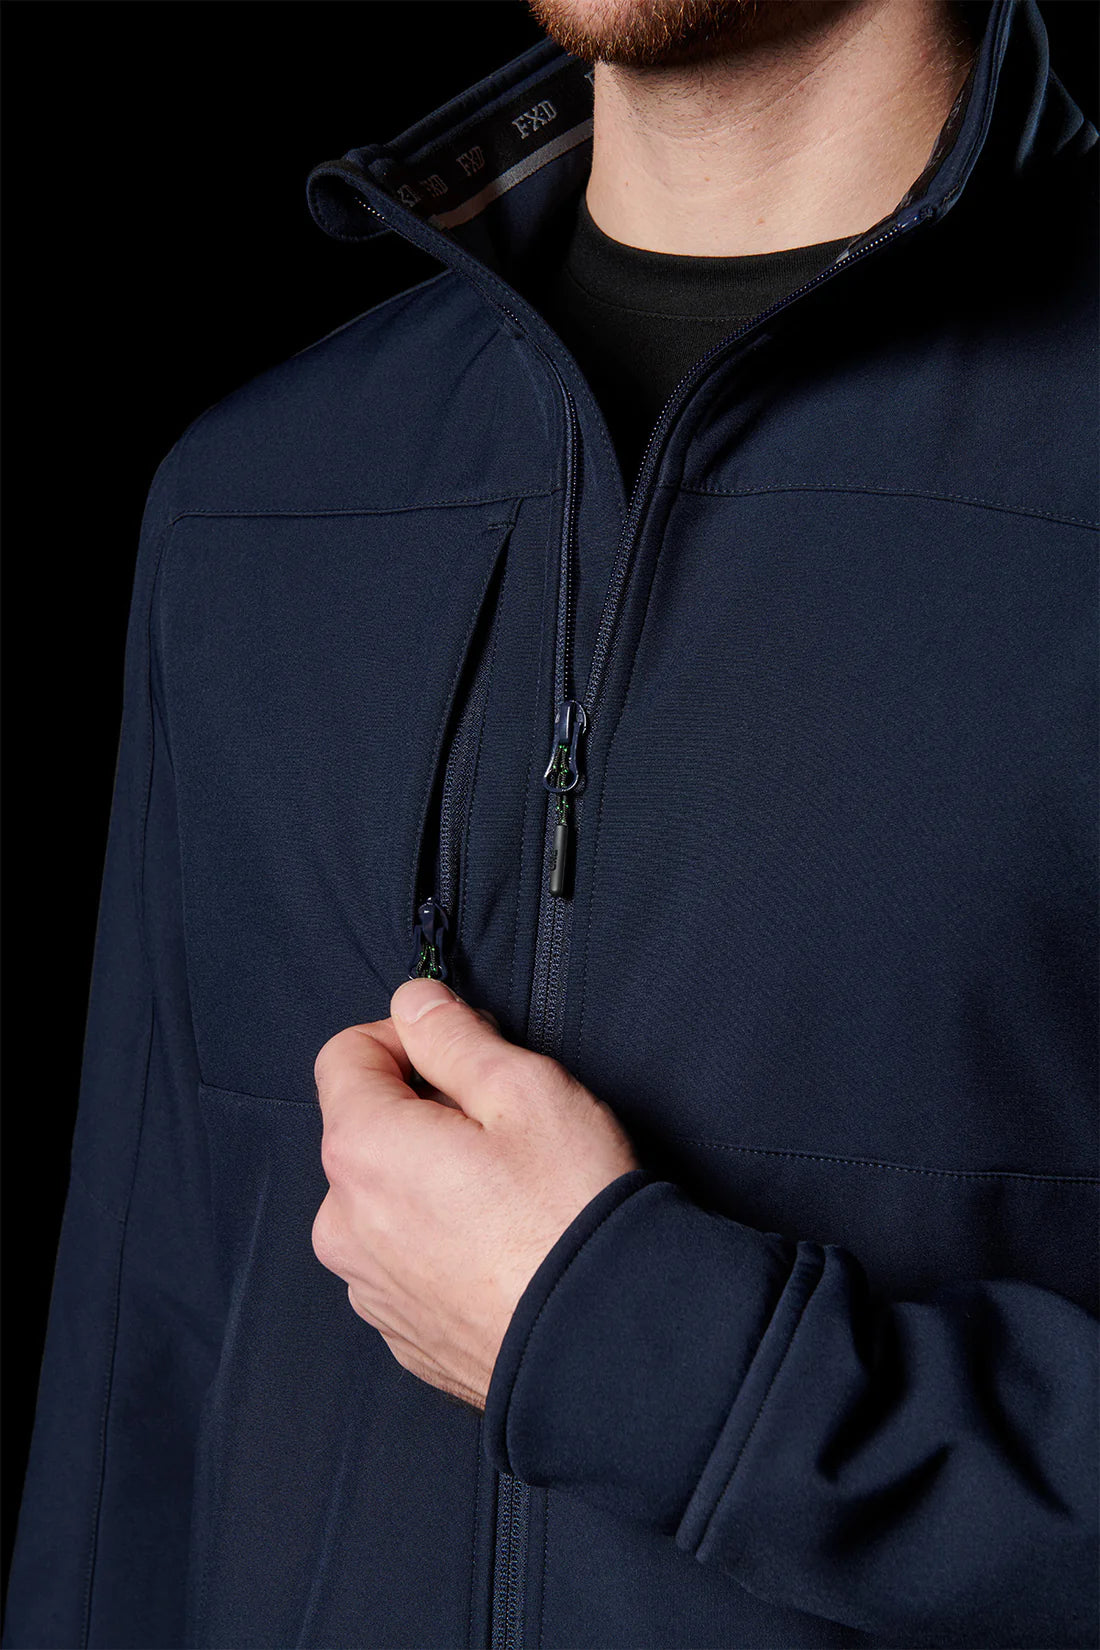 FXD WO-3 - SOFT SHELL WORK JACKET